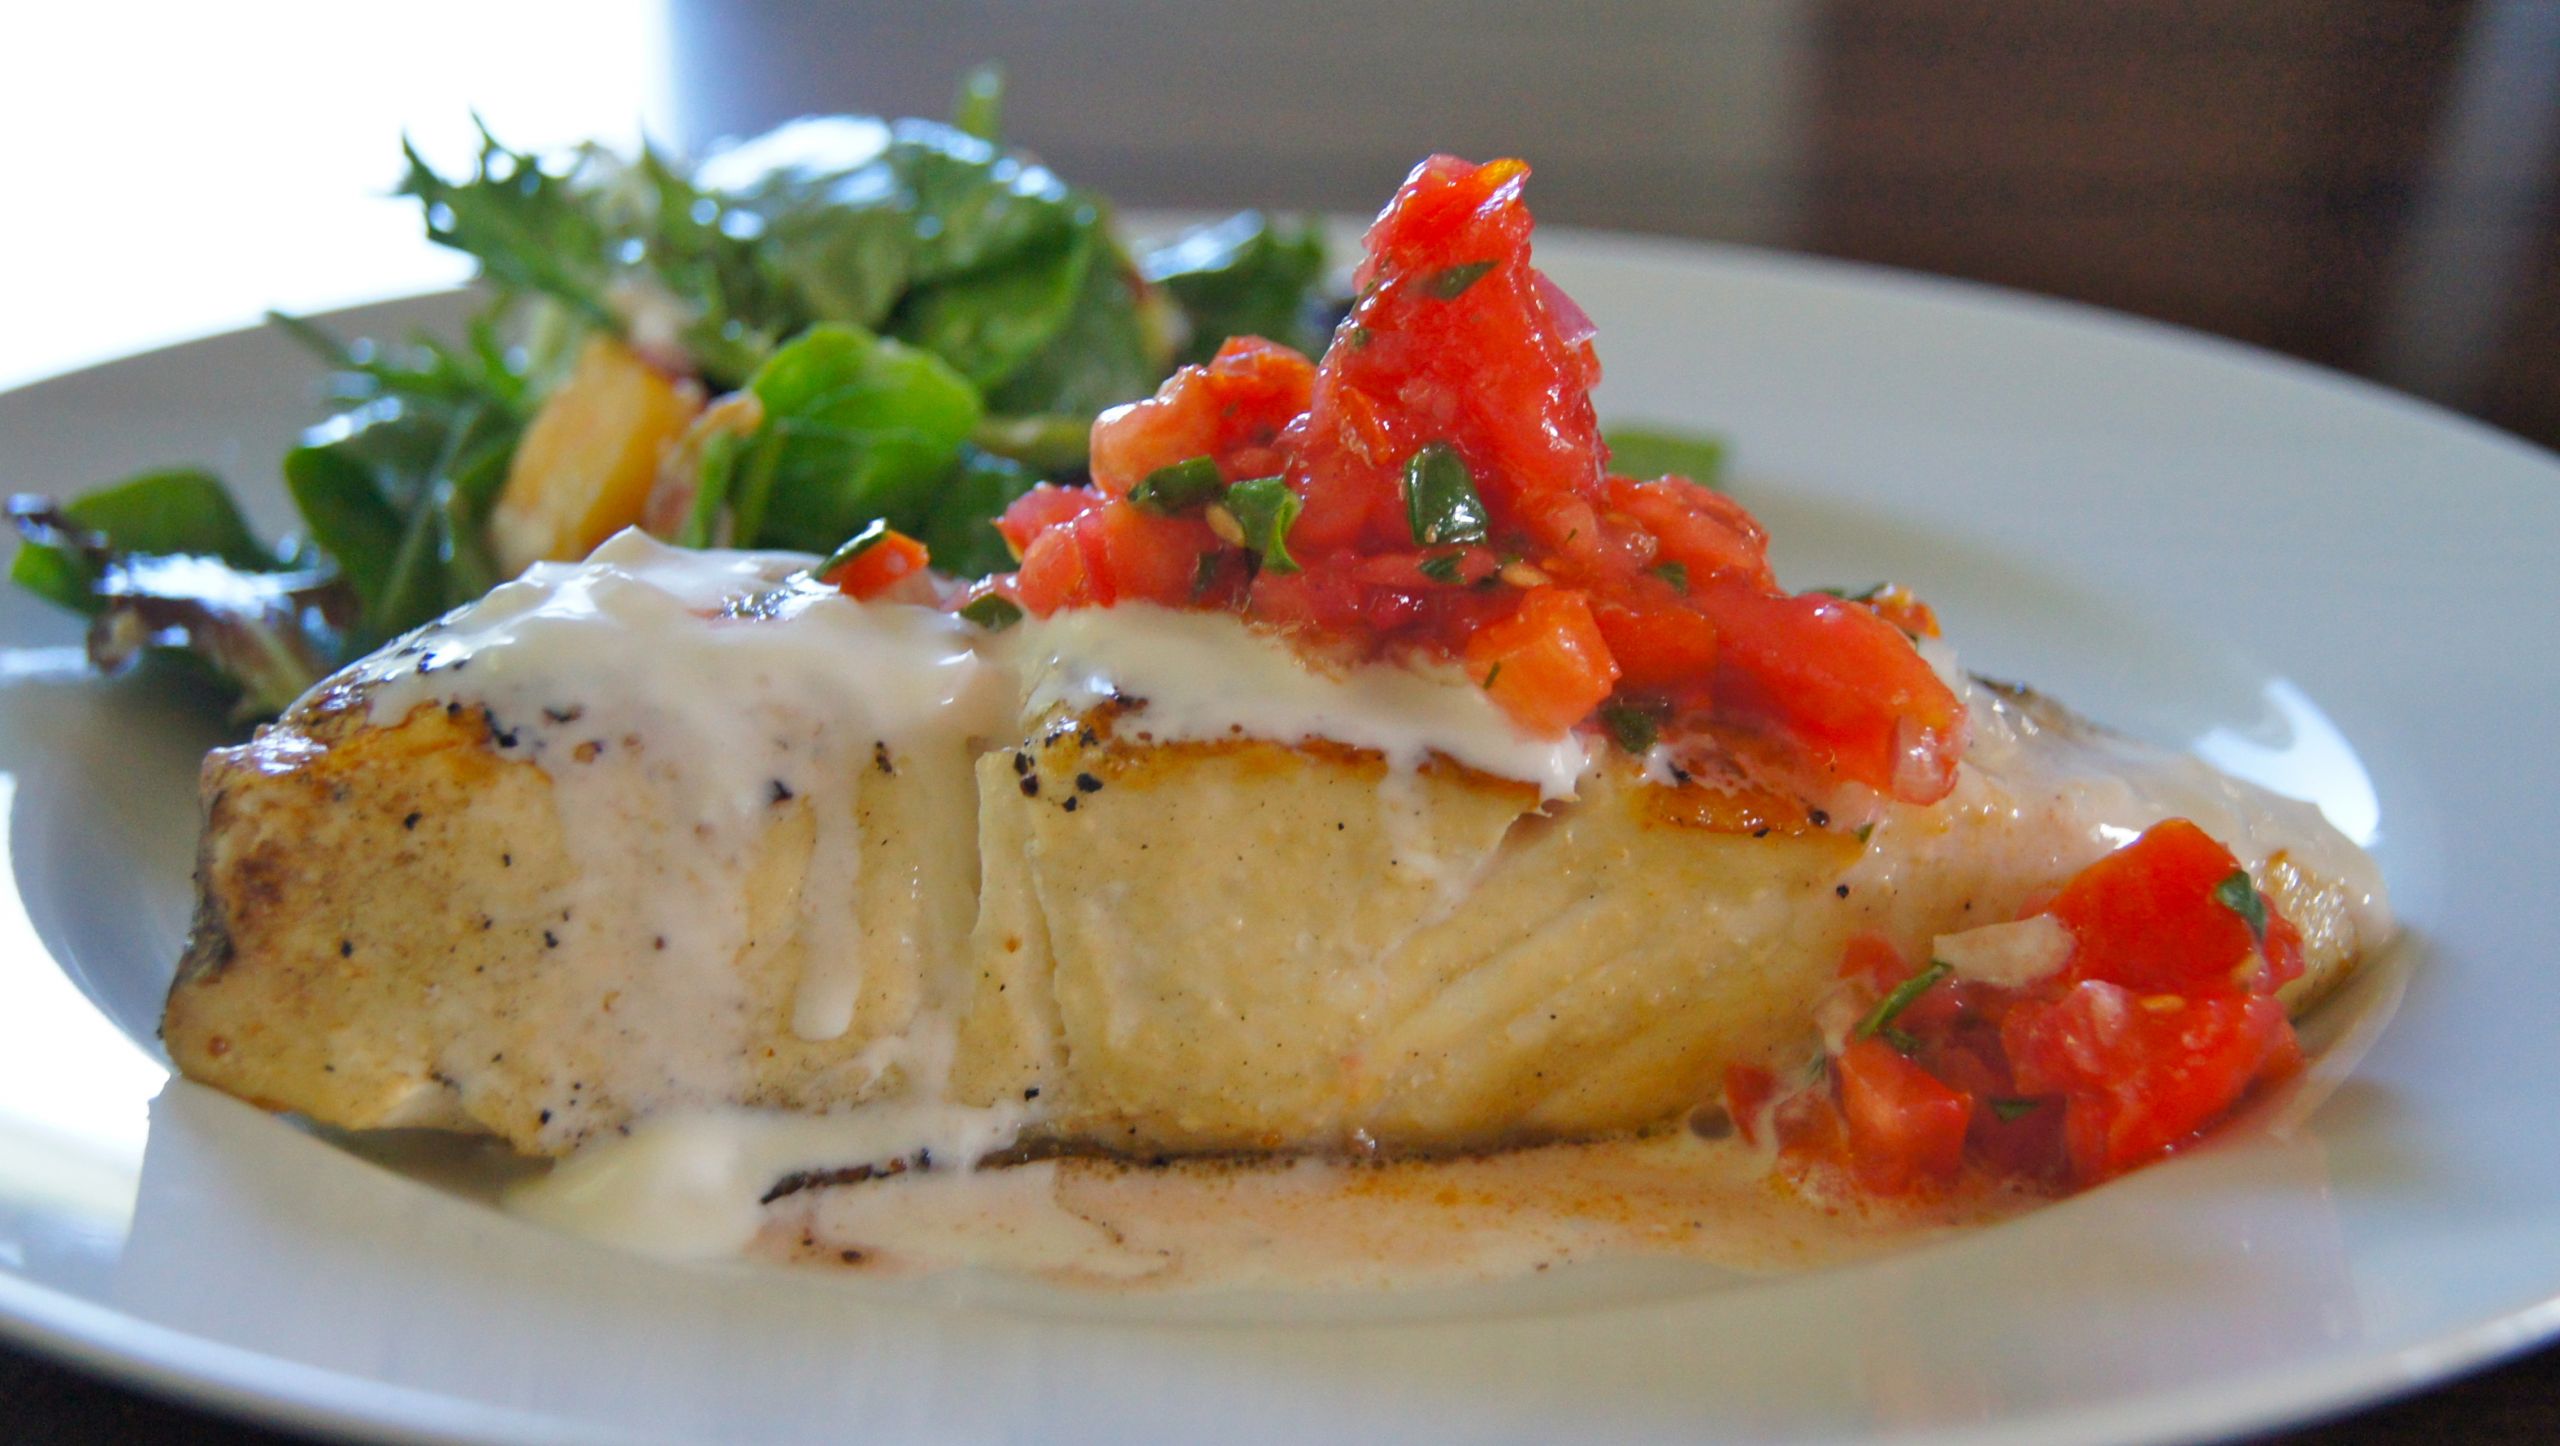 Healthy Sauces For Fish
 Healthy Dinner Fish Recipe Halibut in Creamy Wine Sauce